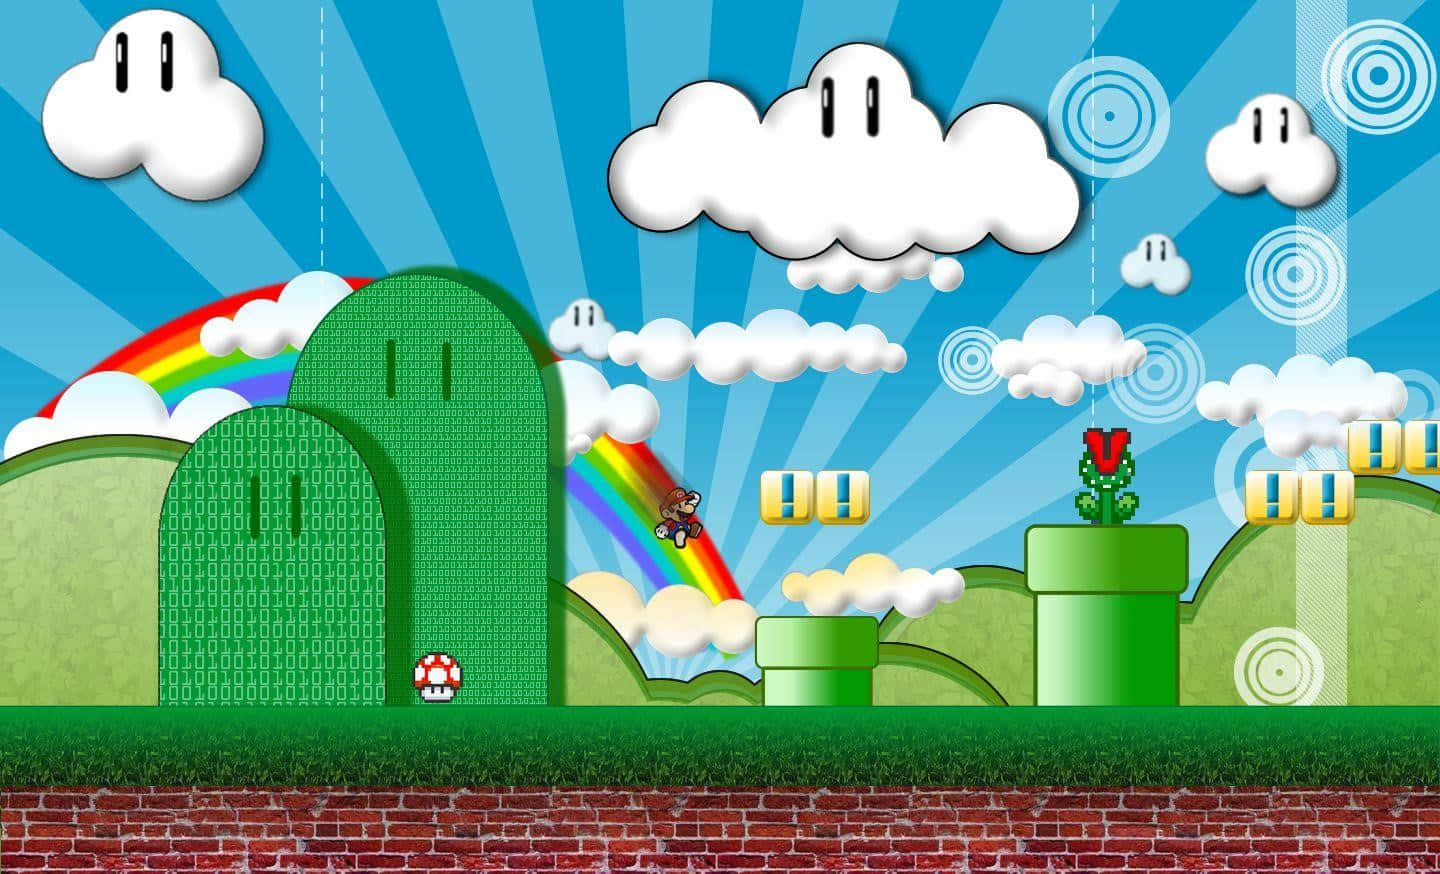 Super Mario takes the classic adventure to a whole new level